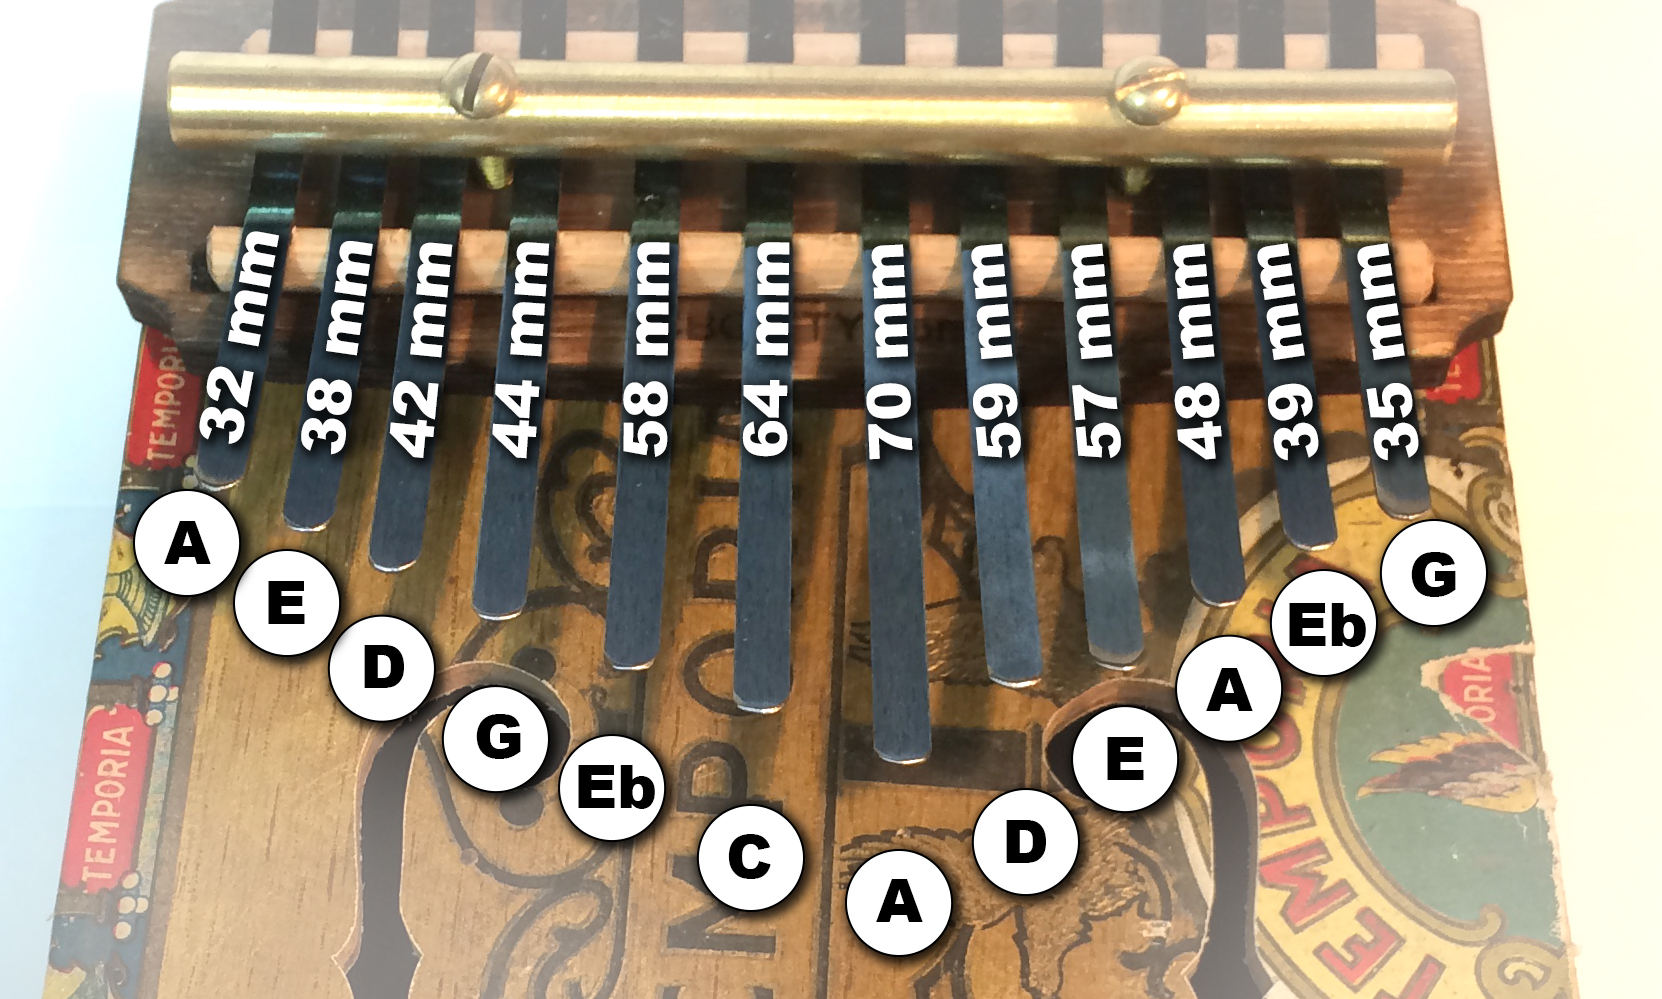 Cigar Box Kalimba BLUES! How to change the tuning to A Minor Blues - B. Gitty Crafter